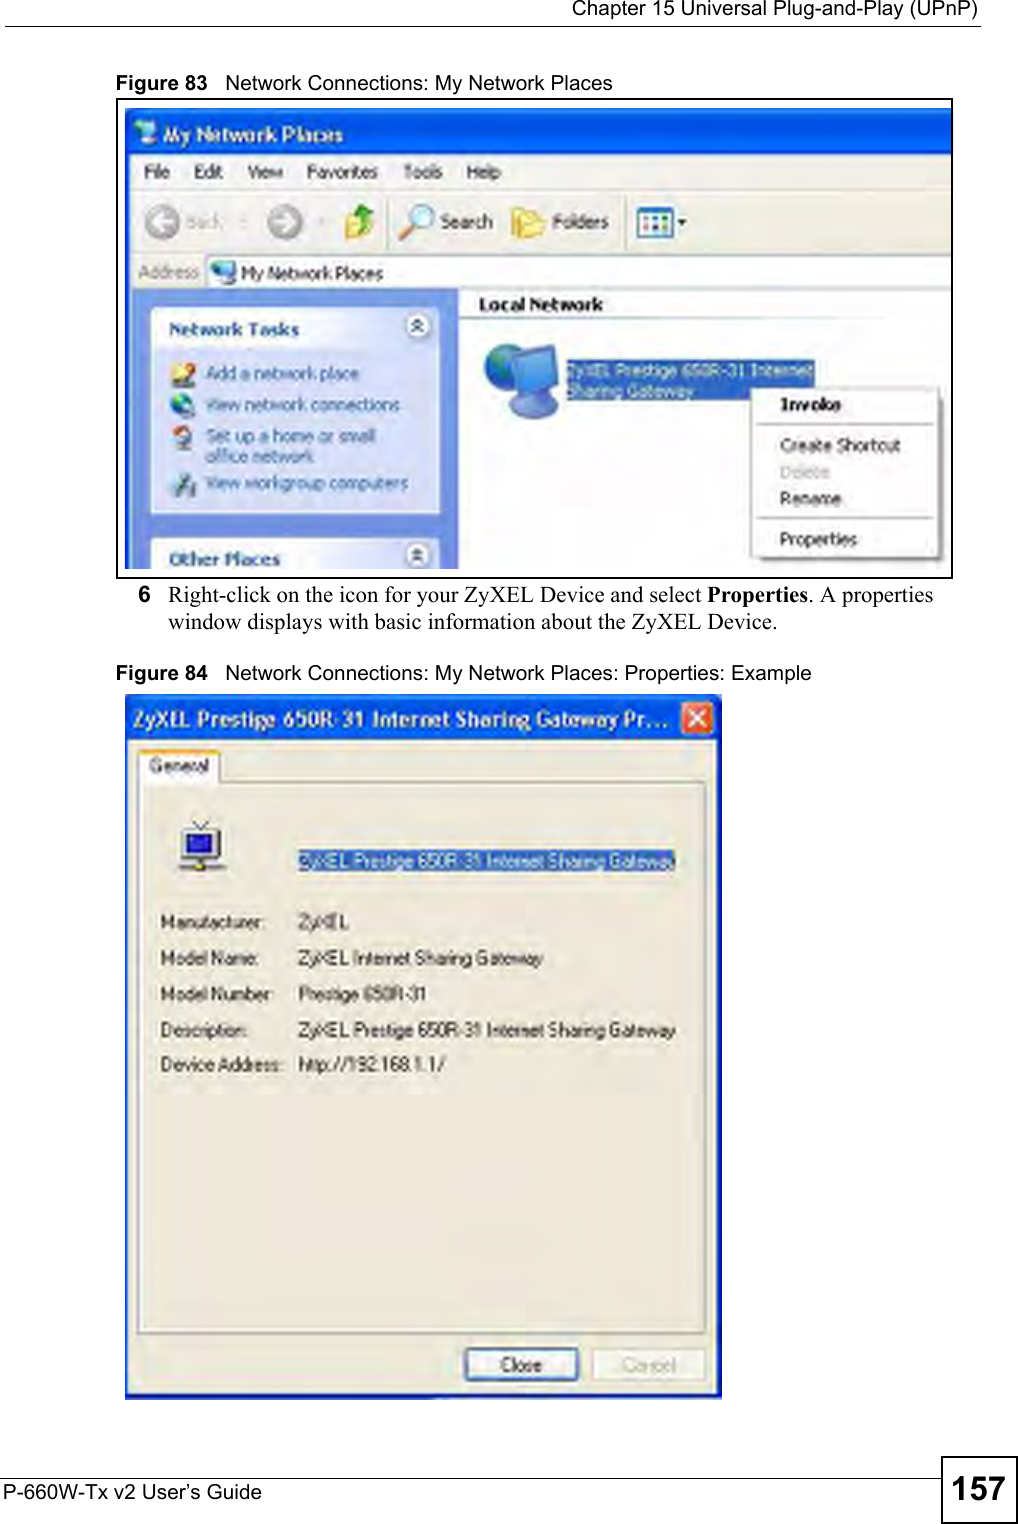  Chapter 15 Universal Plug-and-Play (UPnP)P-660W-Tx v2 User’s Guide 157Figure 83   Network Connections: My Network Places6Right-click on the icon for your ZyXEL Device and select Properties. A properties window displays with basic information about the ZyXEL Device. Figure 84   Network Connections: My Network Places: Properties: Example